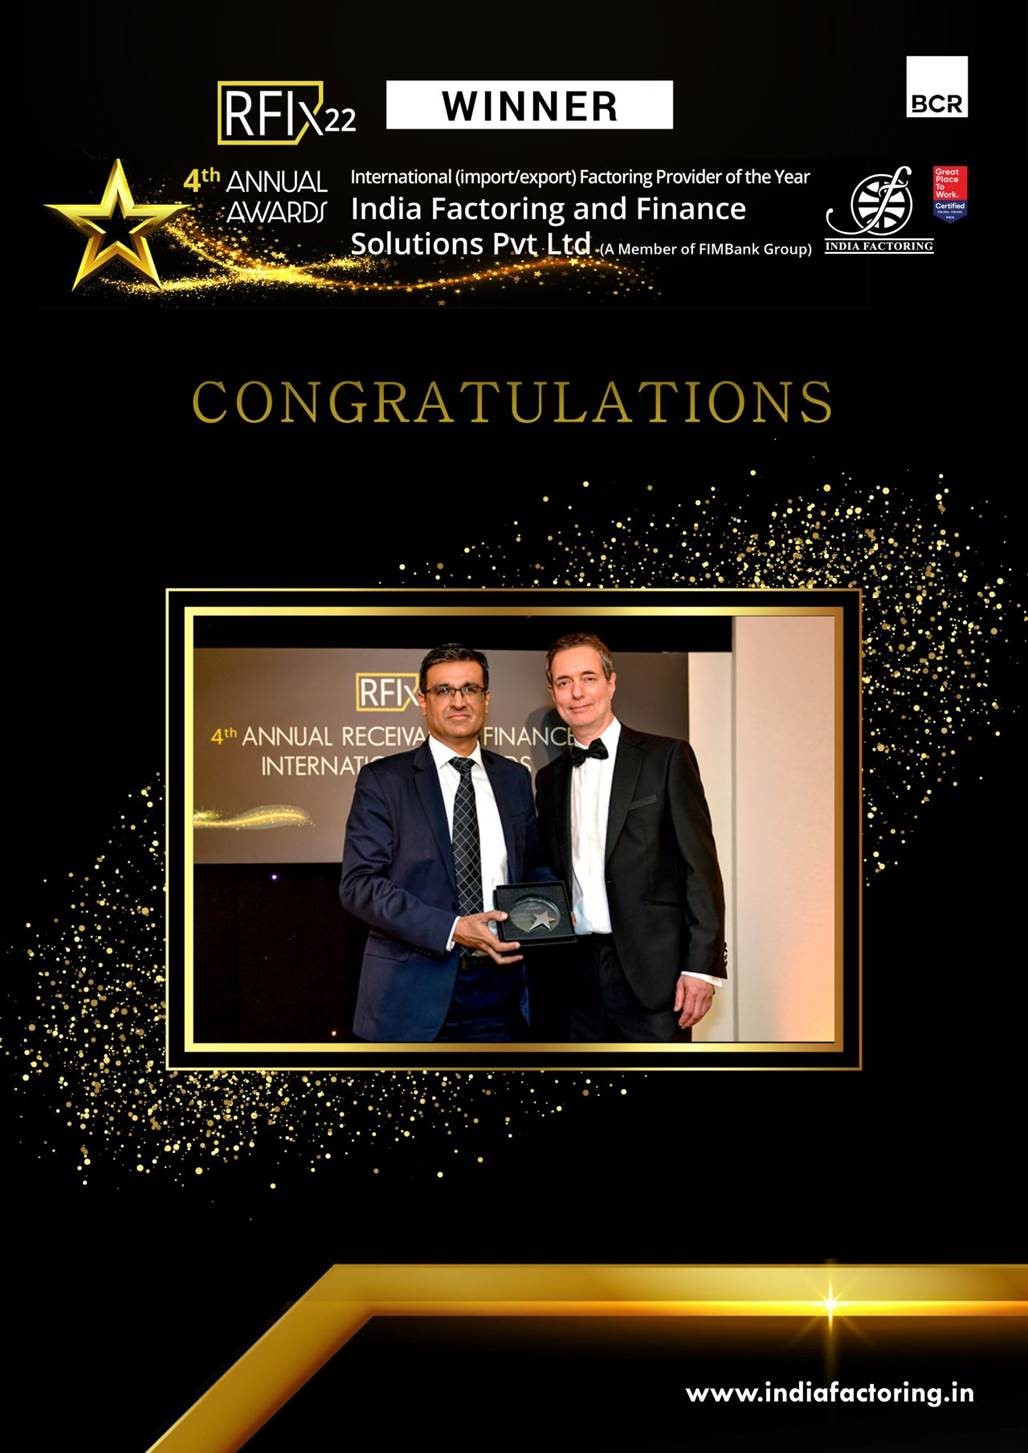 International Factoring Services Provider of the Year 